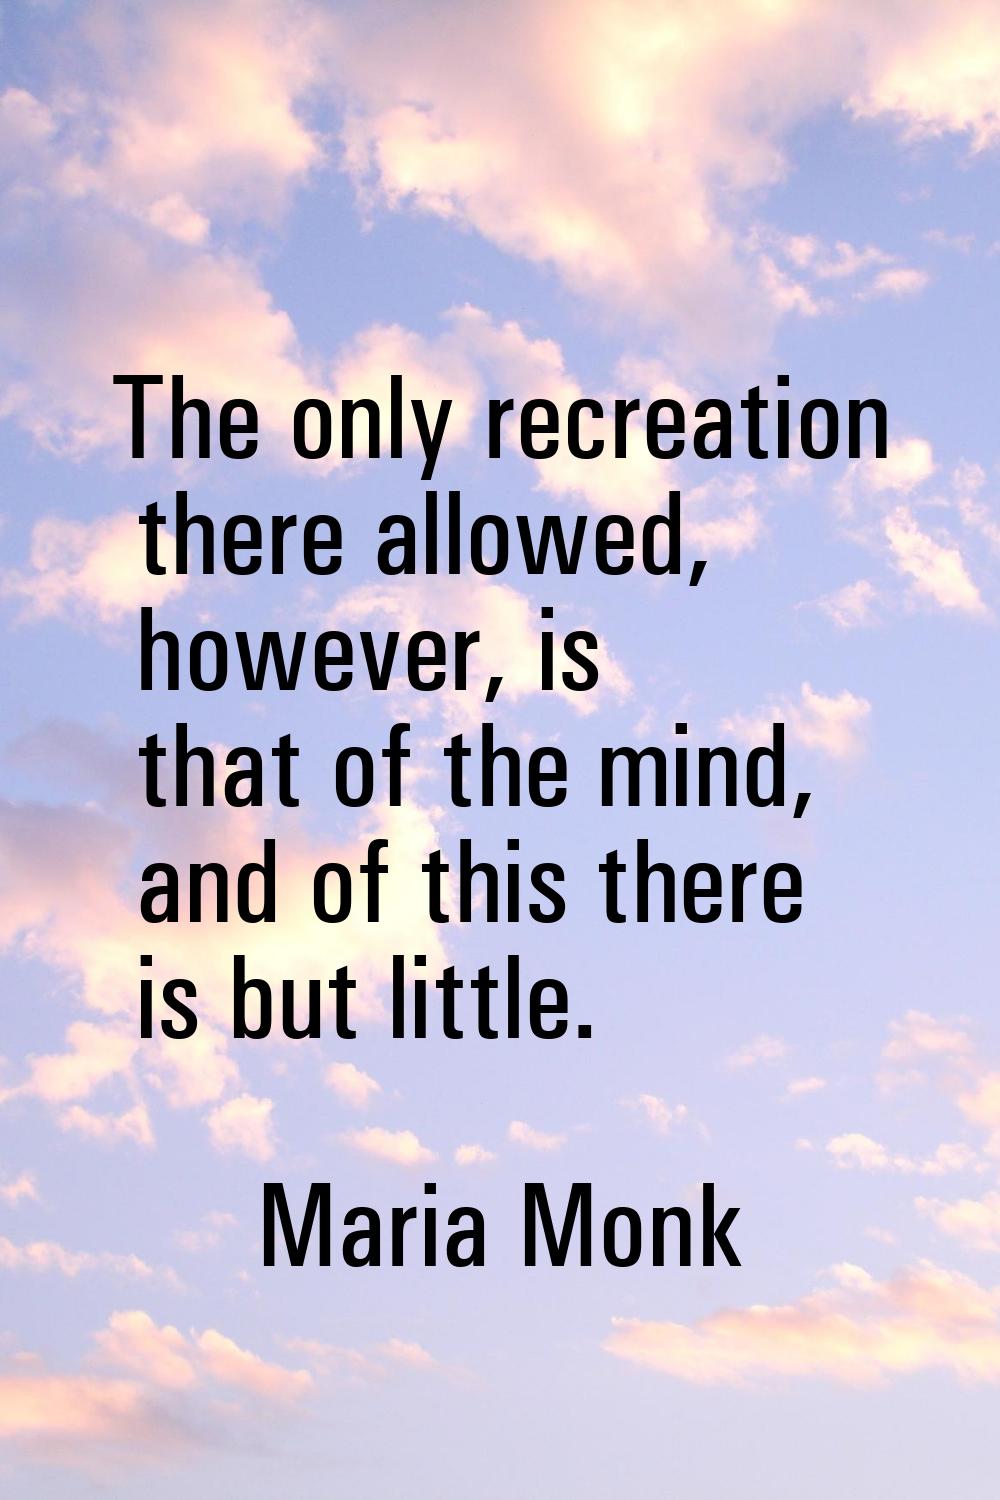 The only recreation there allowed, however, is that of the mind, and of this there is but little.